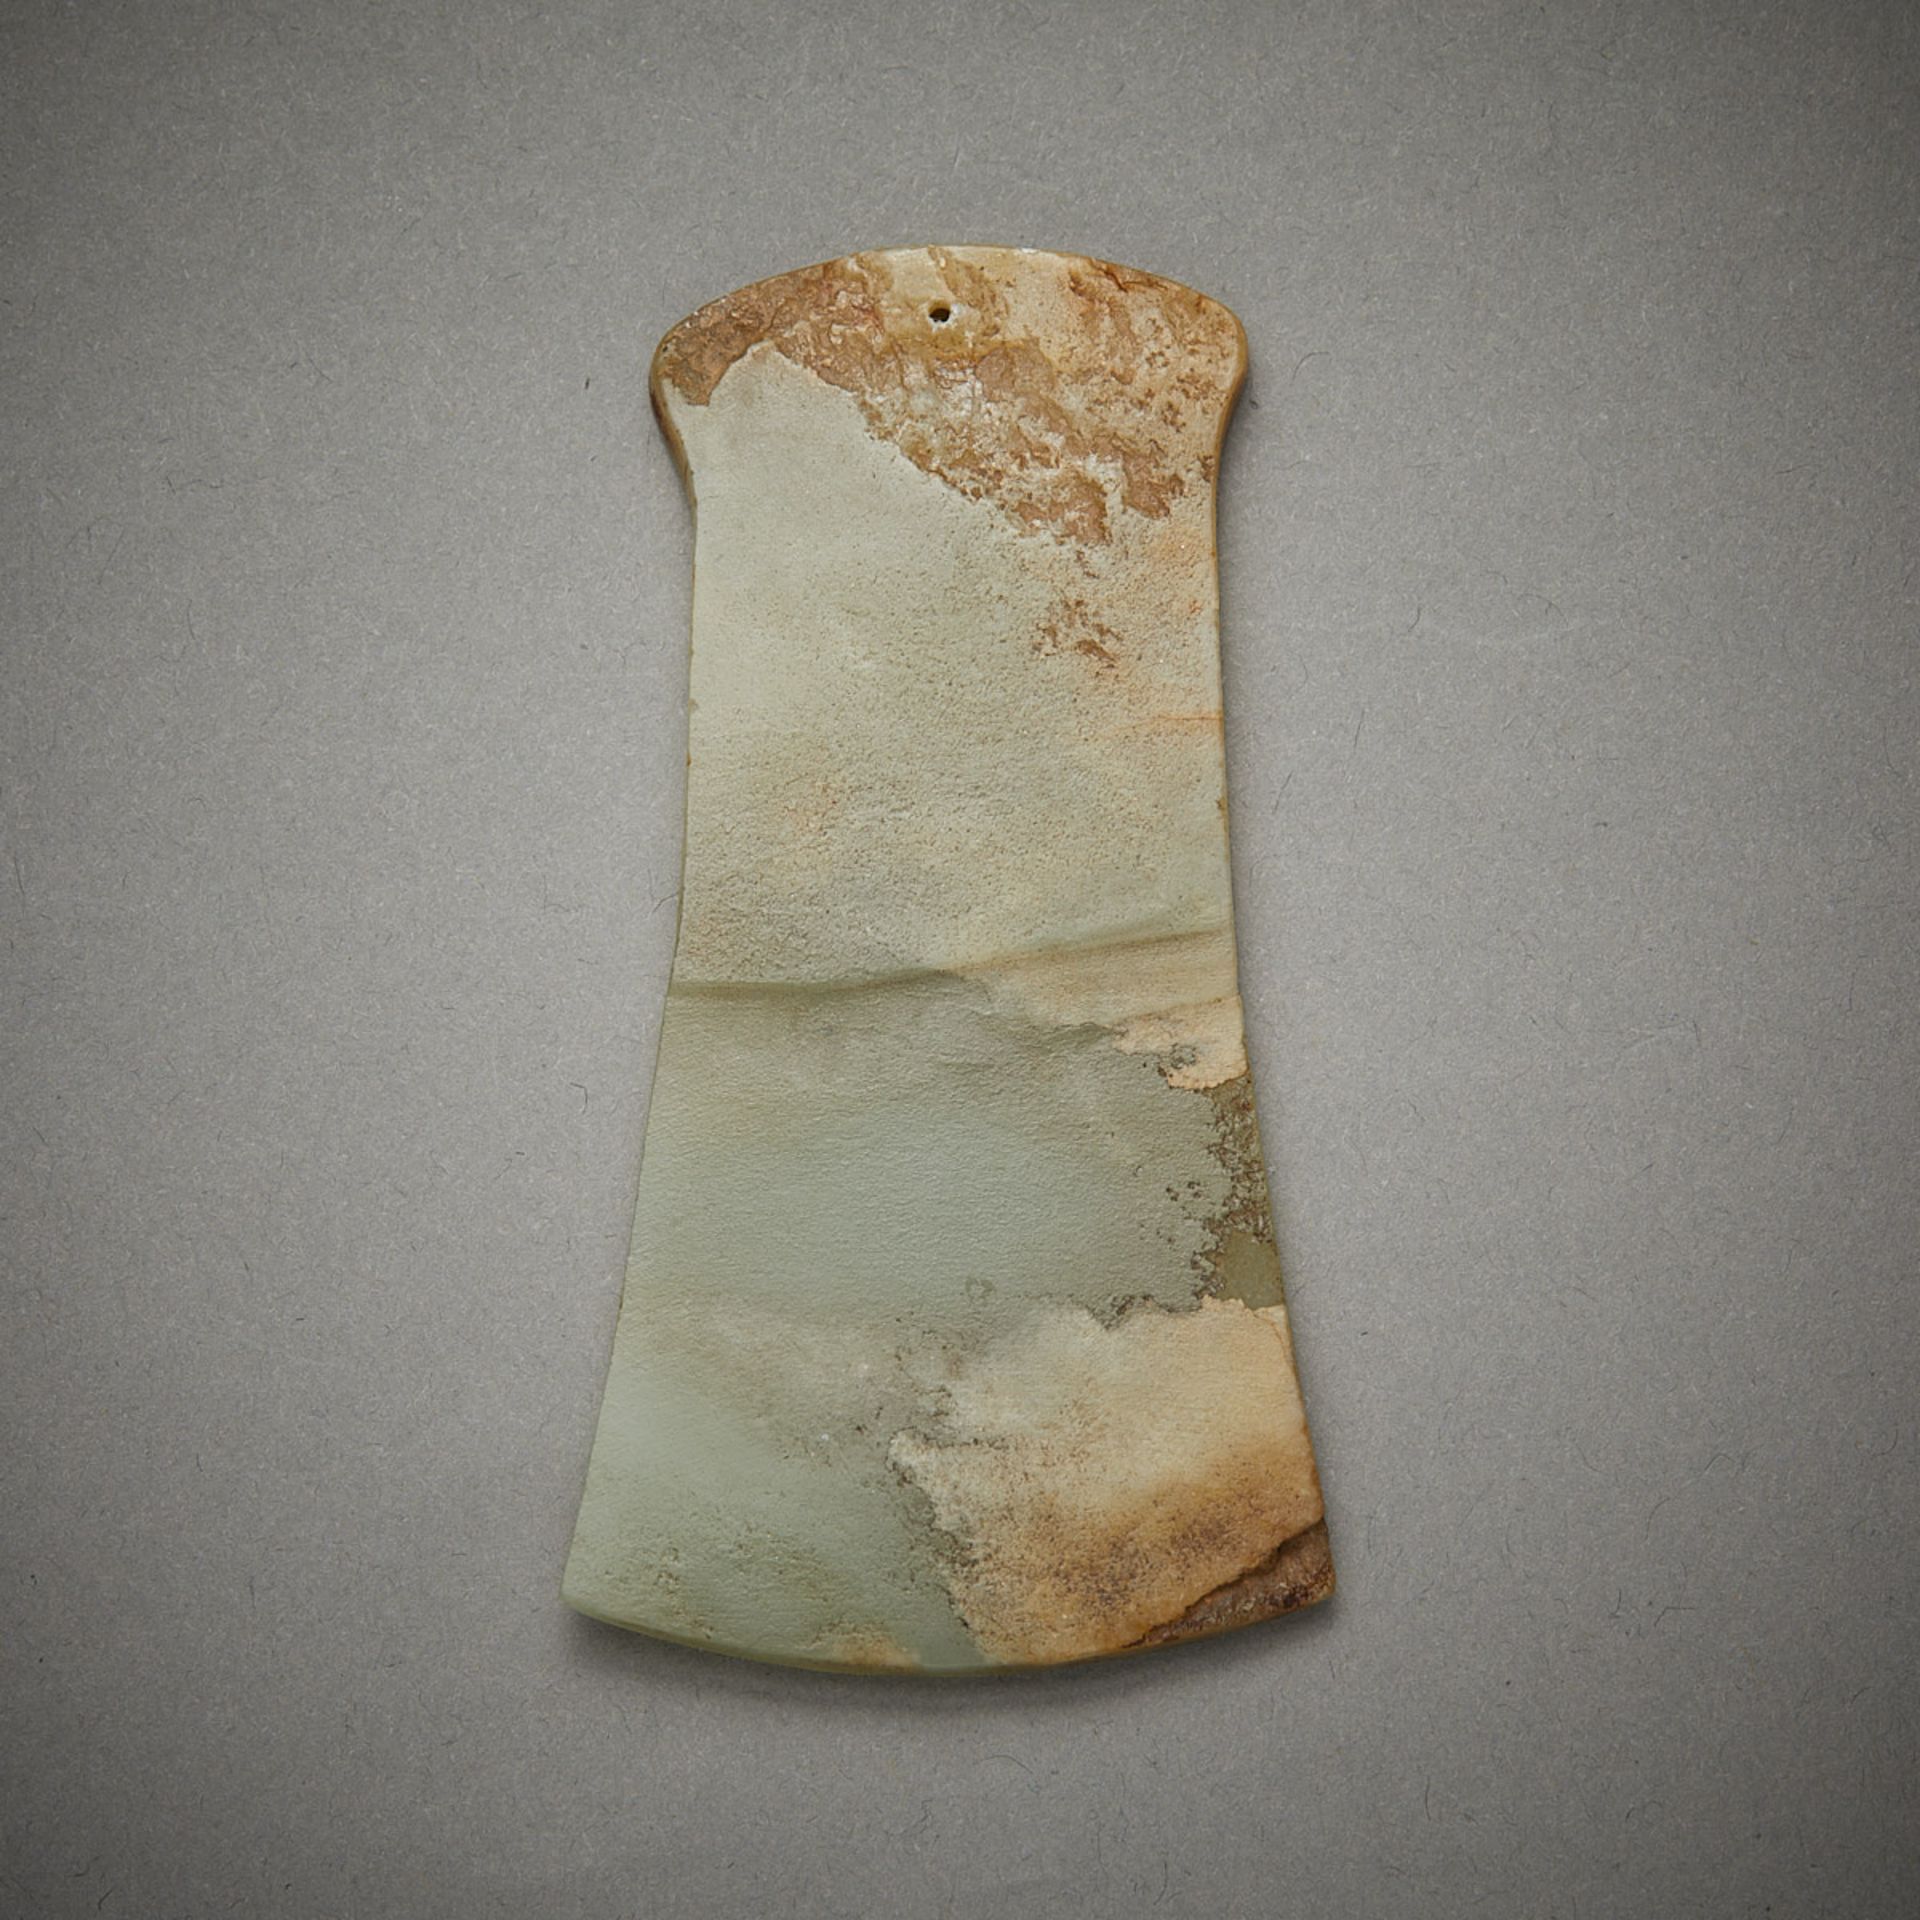 Chinese Antique Jade Carving of a Axe or Vase - Image 3 of 4